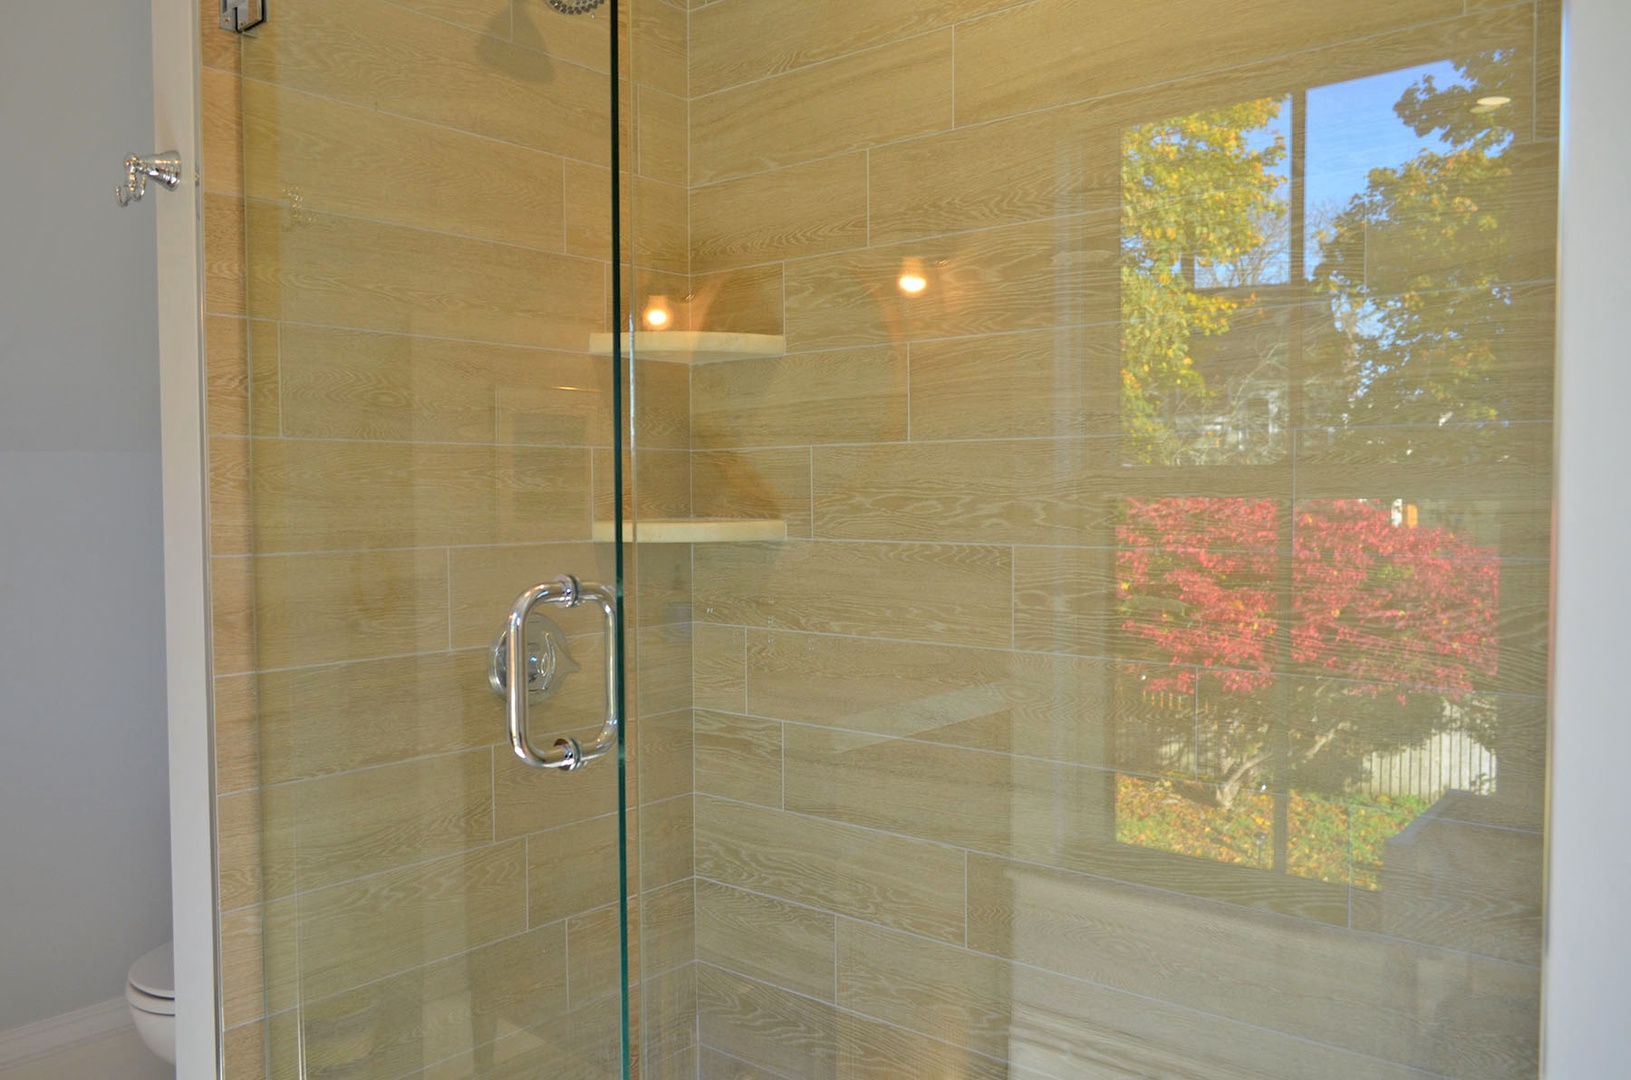 The walk-in shower in the Master ensuite bath.